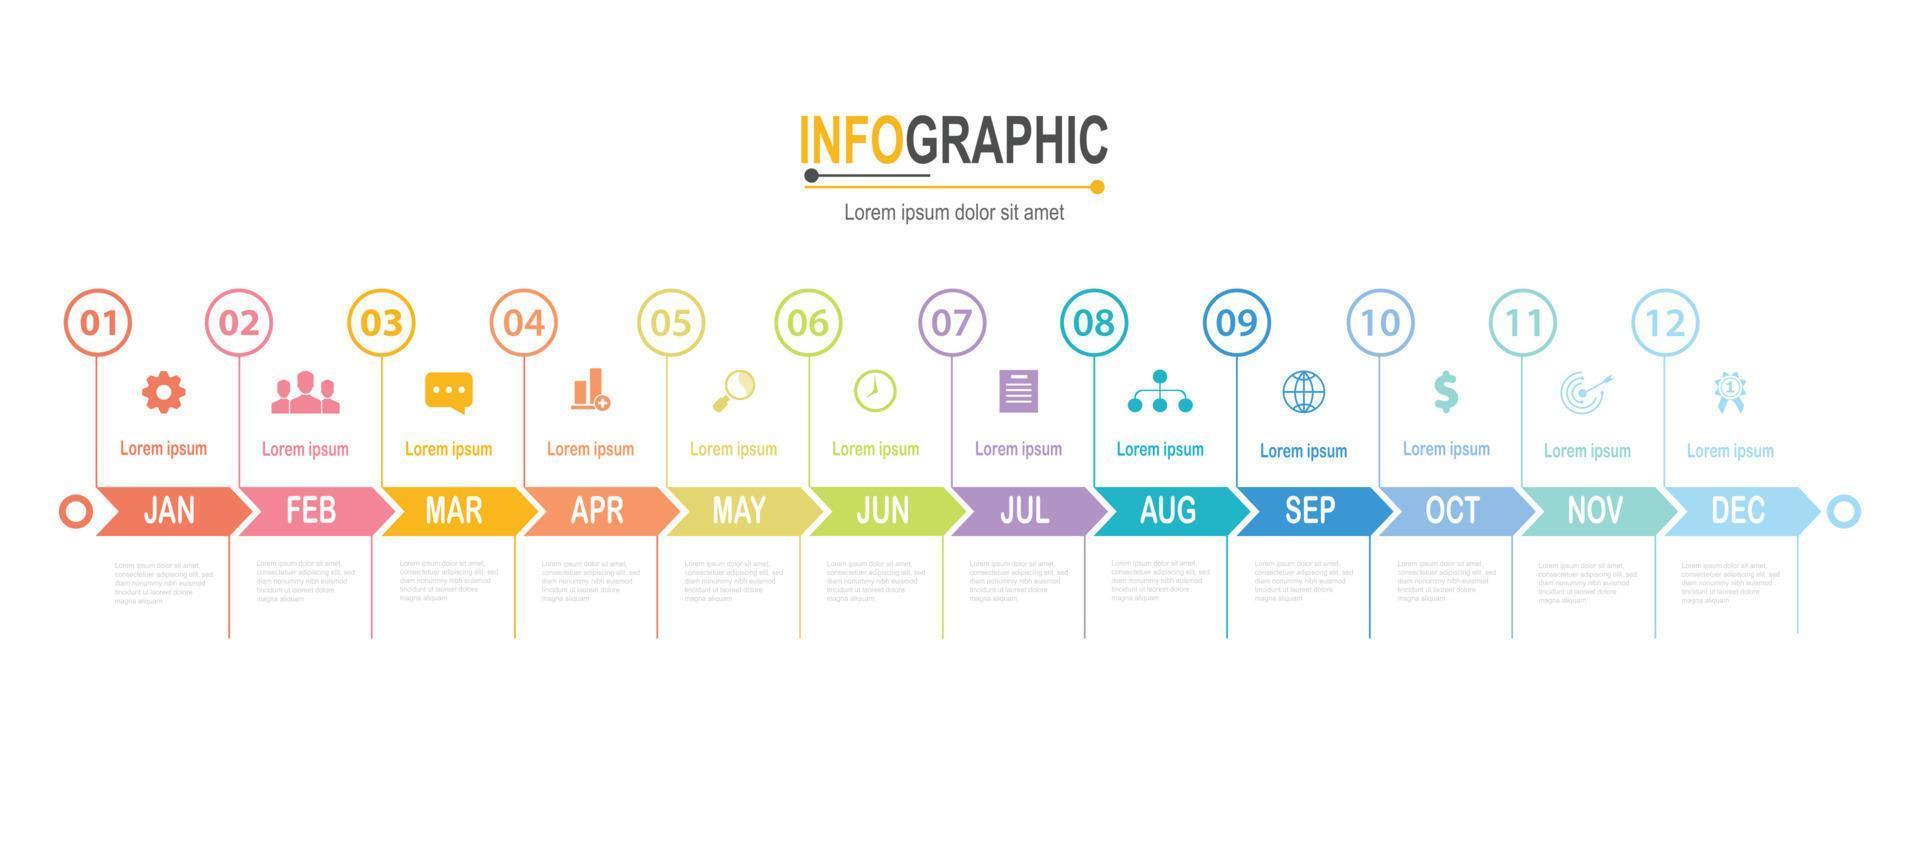 Infographic 12 steps Timeline in 1 year template business data illustration vector